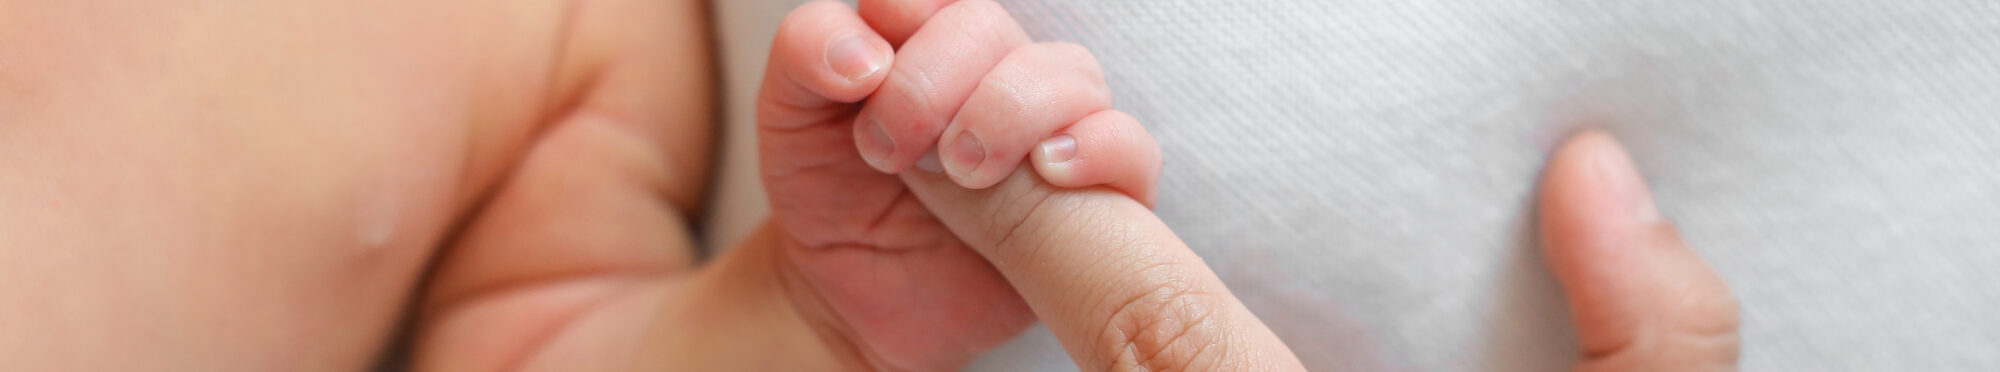 The,Newborn,Is,Holding,A,Finger,Of,Mother,On,A